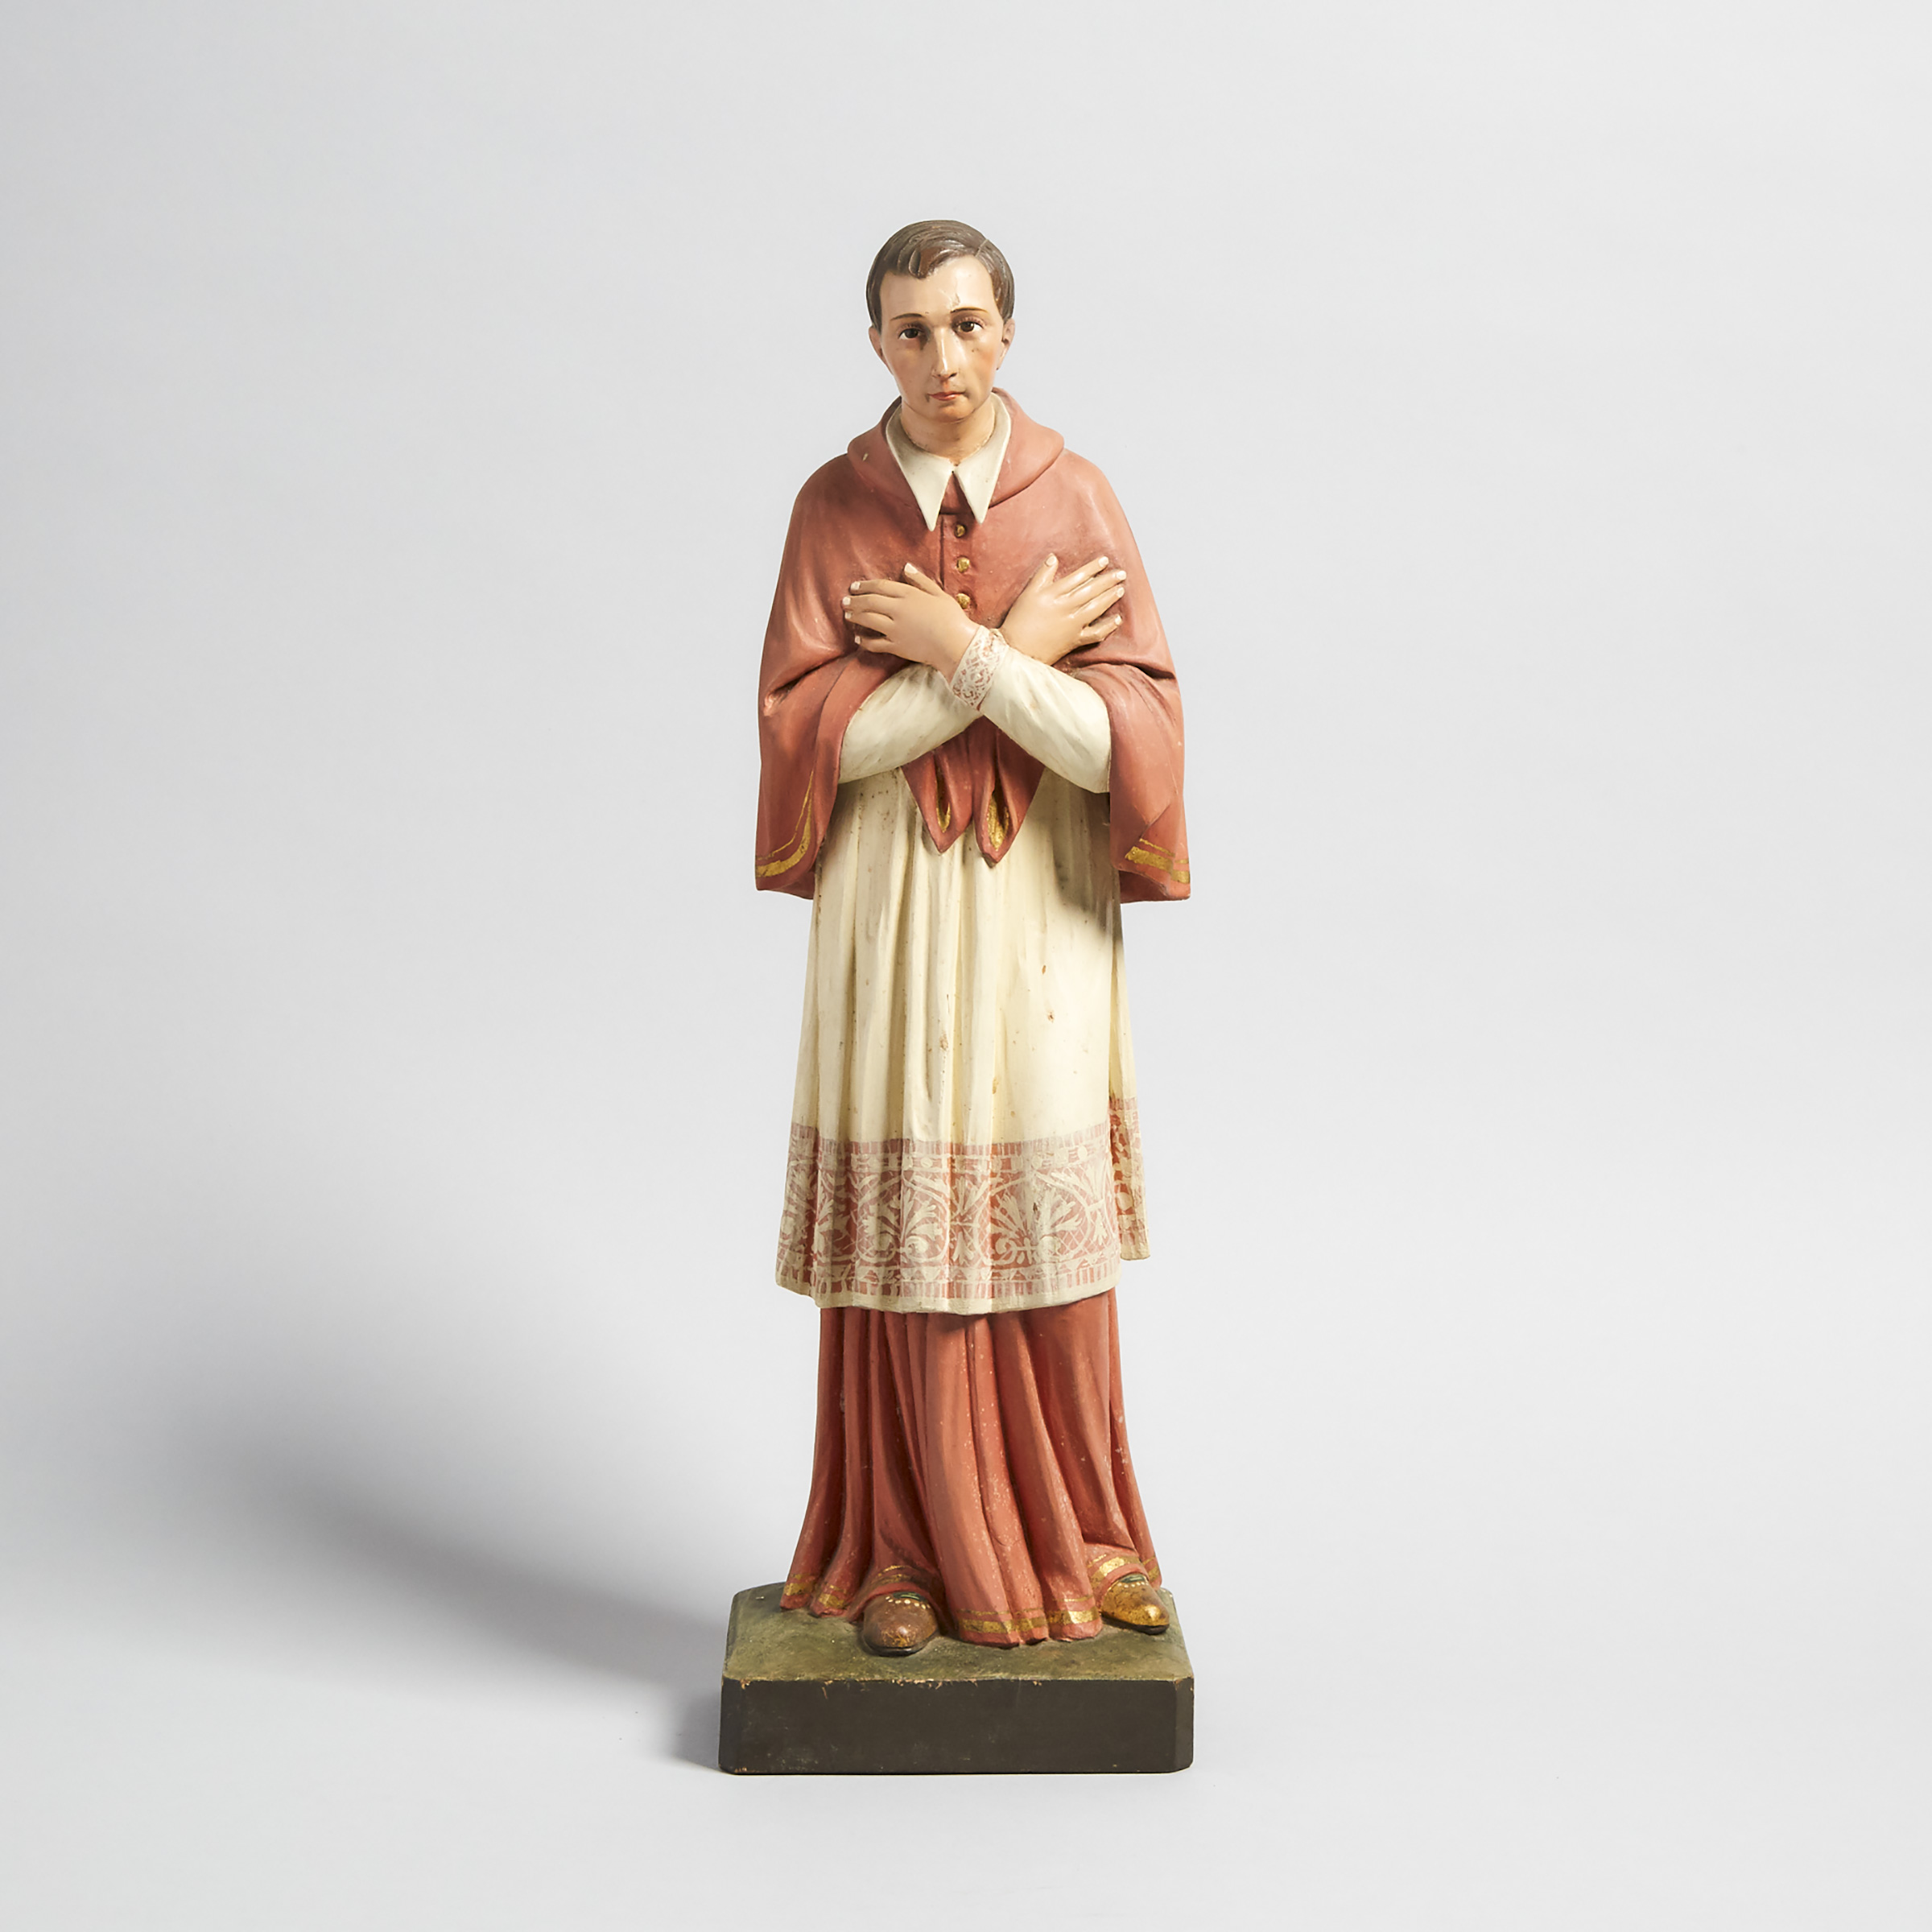 Italian Carved and Polychromed Figure of a Saint, early-mid 20th century